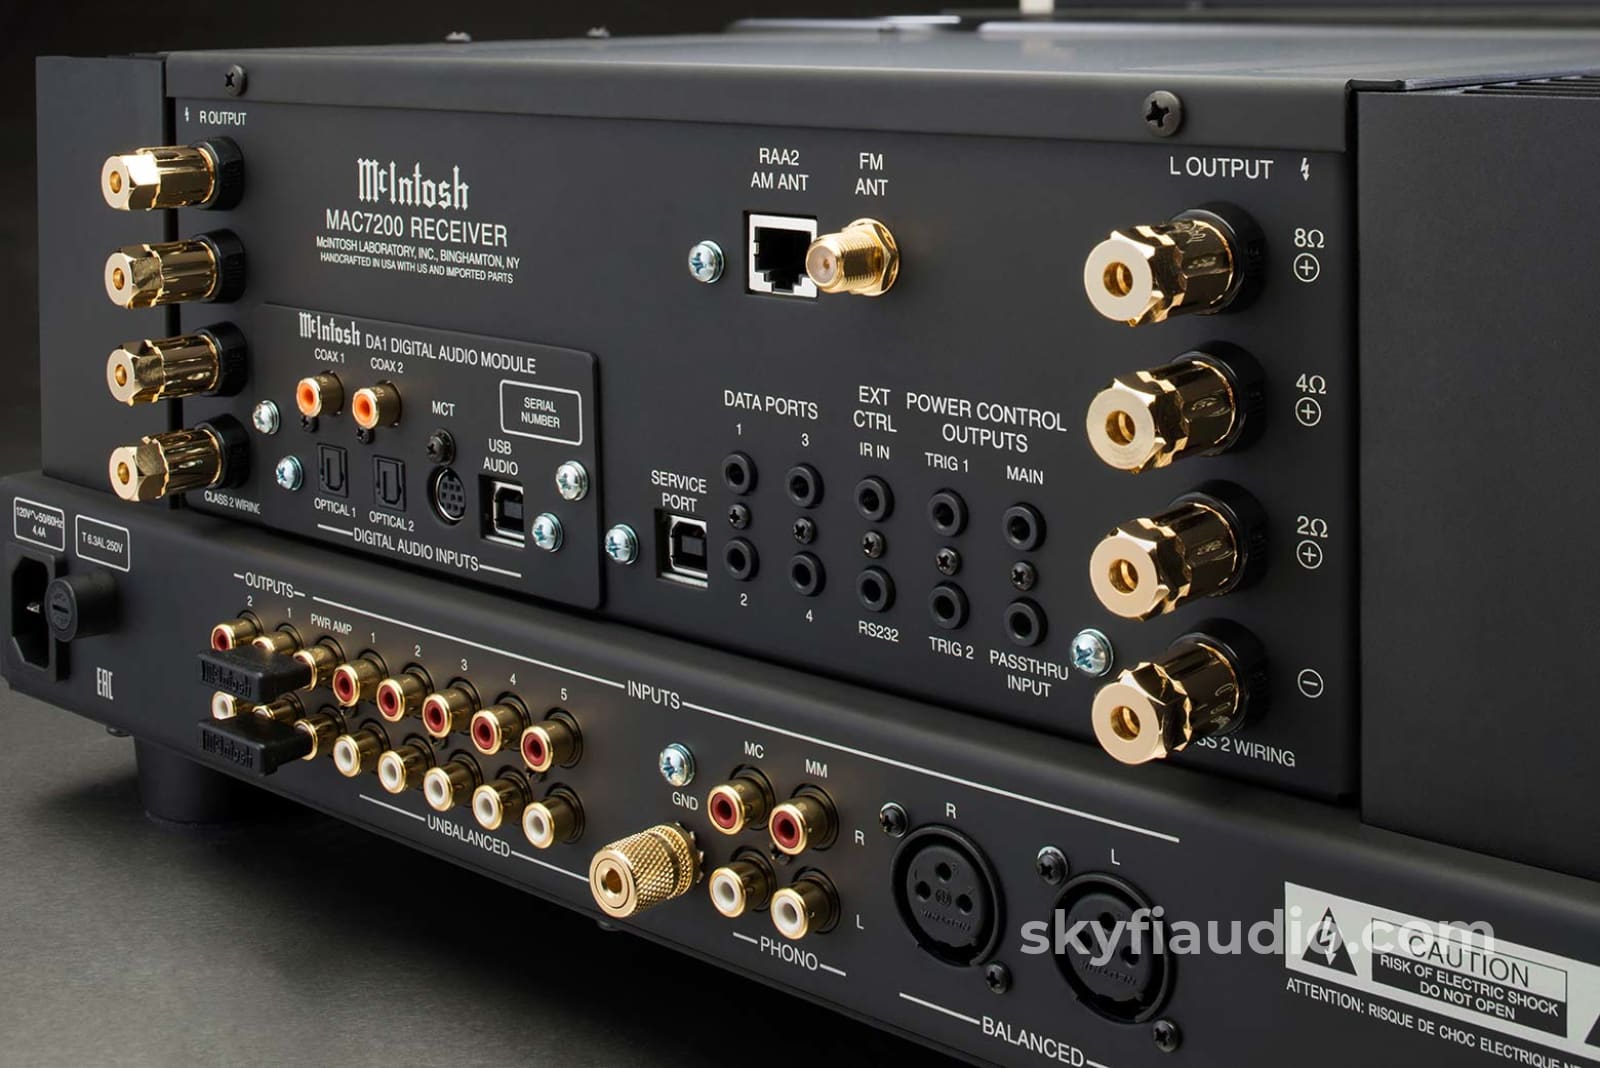 Mcintosh Mac7200 Receiver And Dac Integrated Amplifier